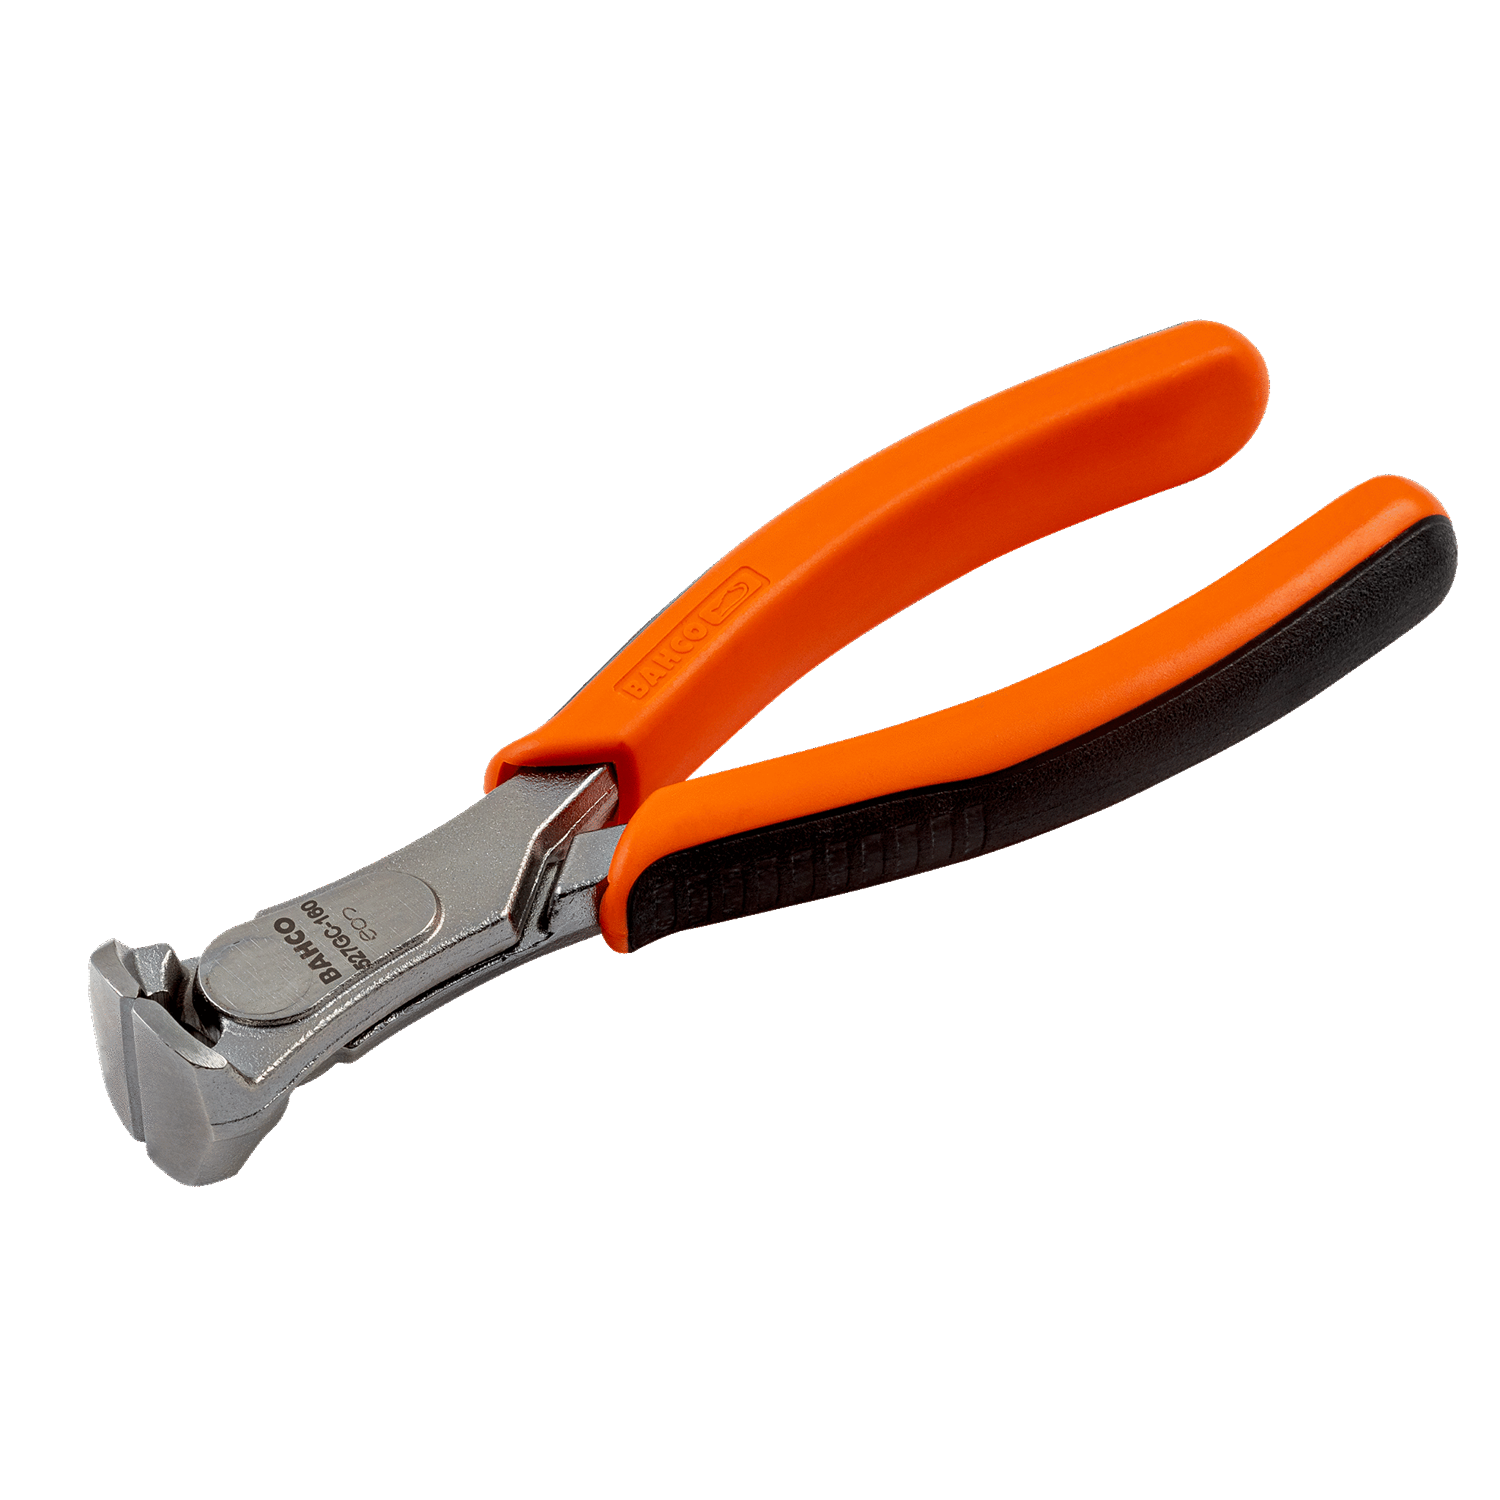 BAHCO 527 GC End Cutting Plier with Bi-Material Handles - Premium Cutting Plier from BAHCO - Shop now at Yew Aik.